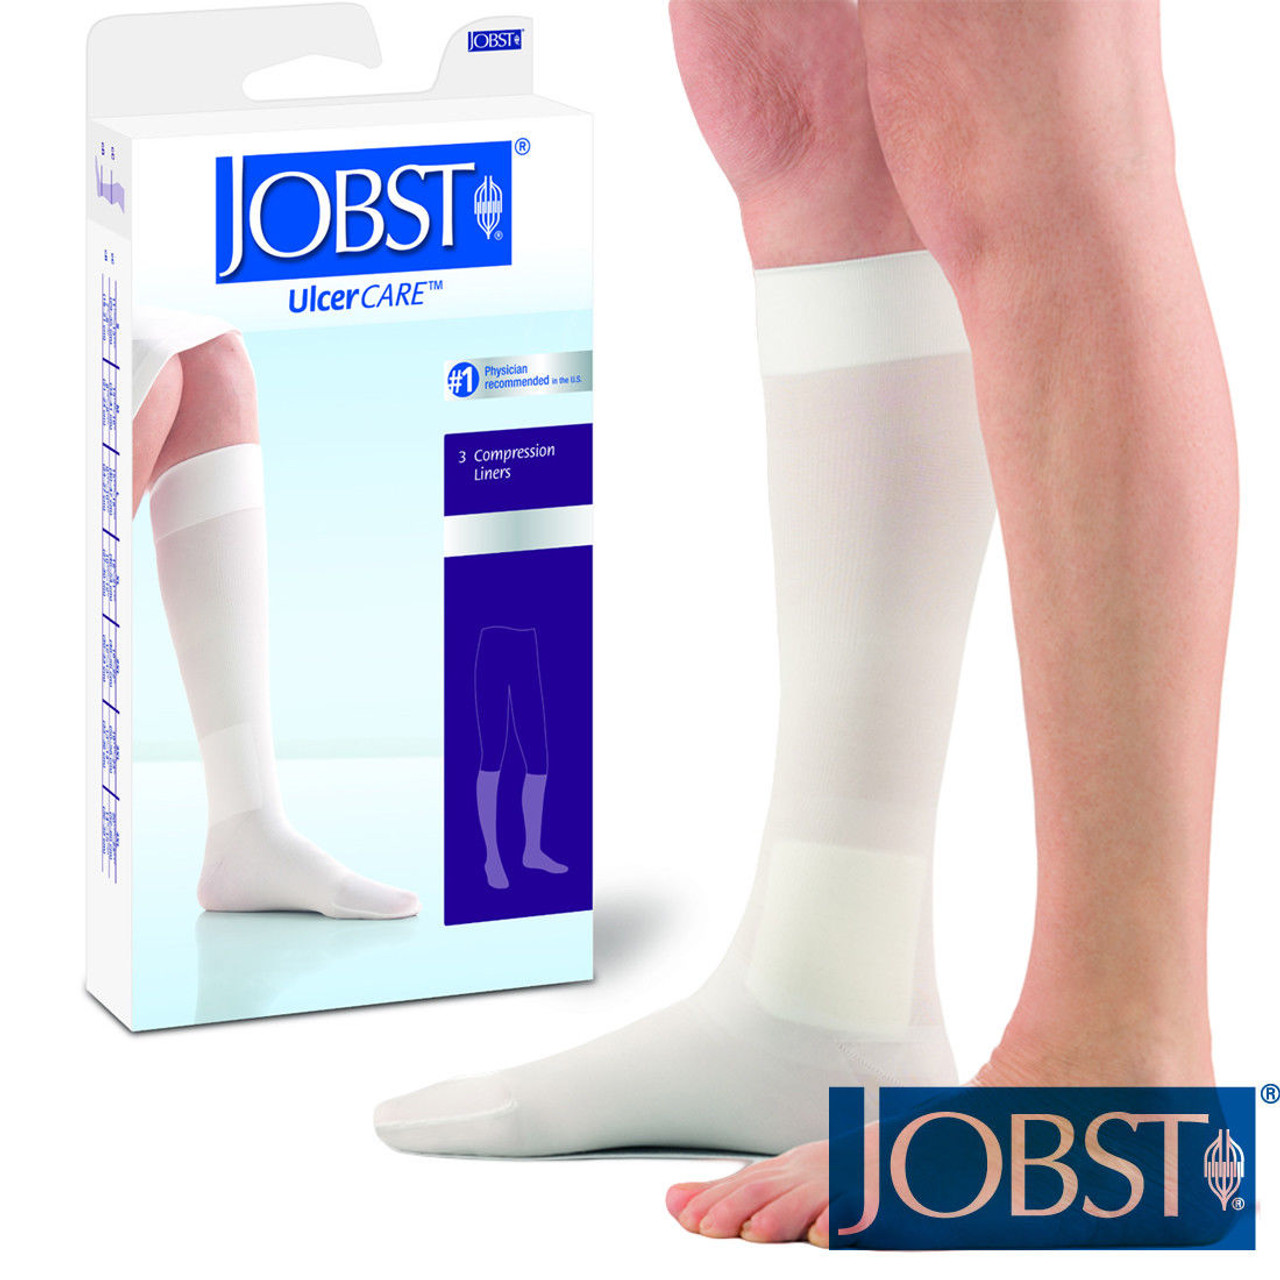 BSN-7363224 BX/3 JOBST ULCERCARE REPLACEMENT LINERS FOR READY-TO-WEAR COMPRESSION XL, WHITE